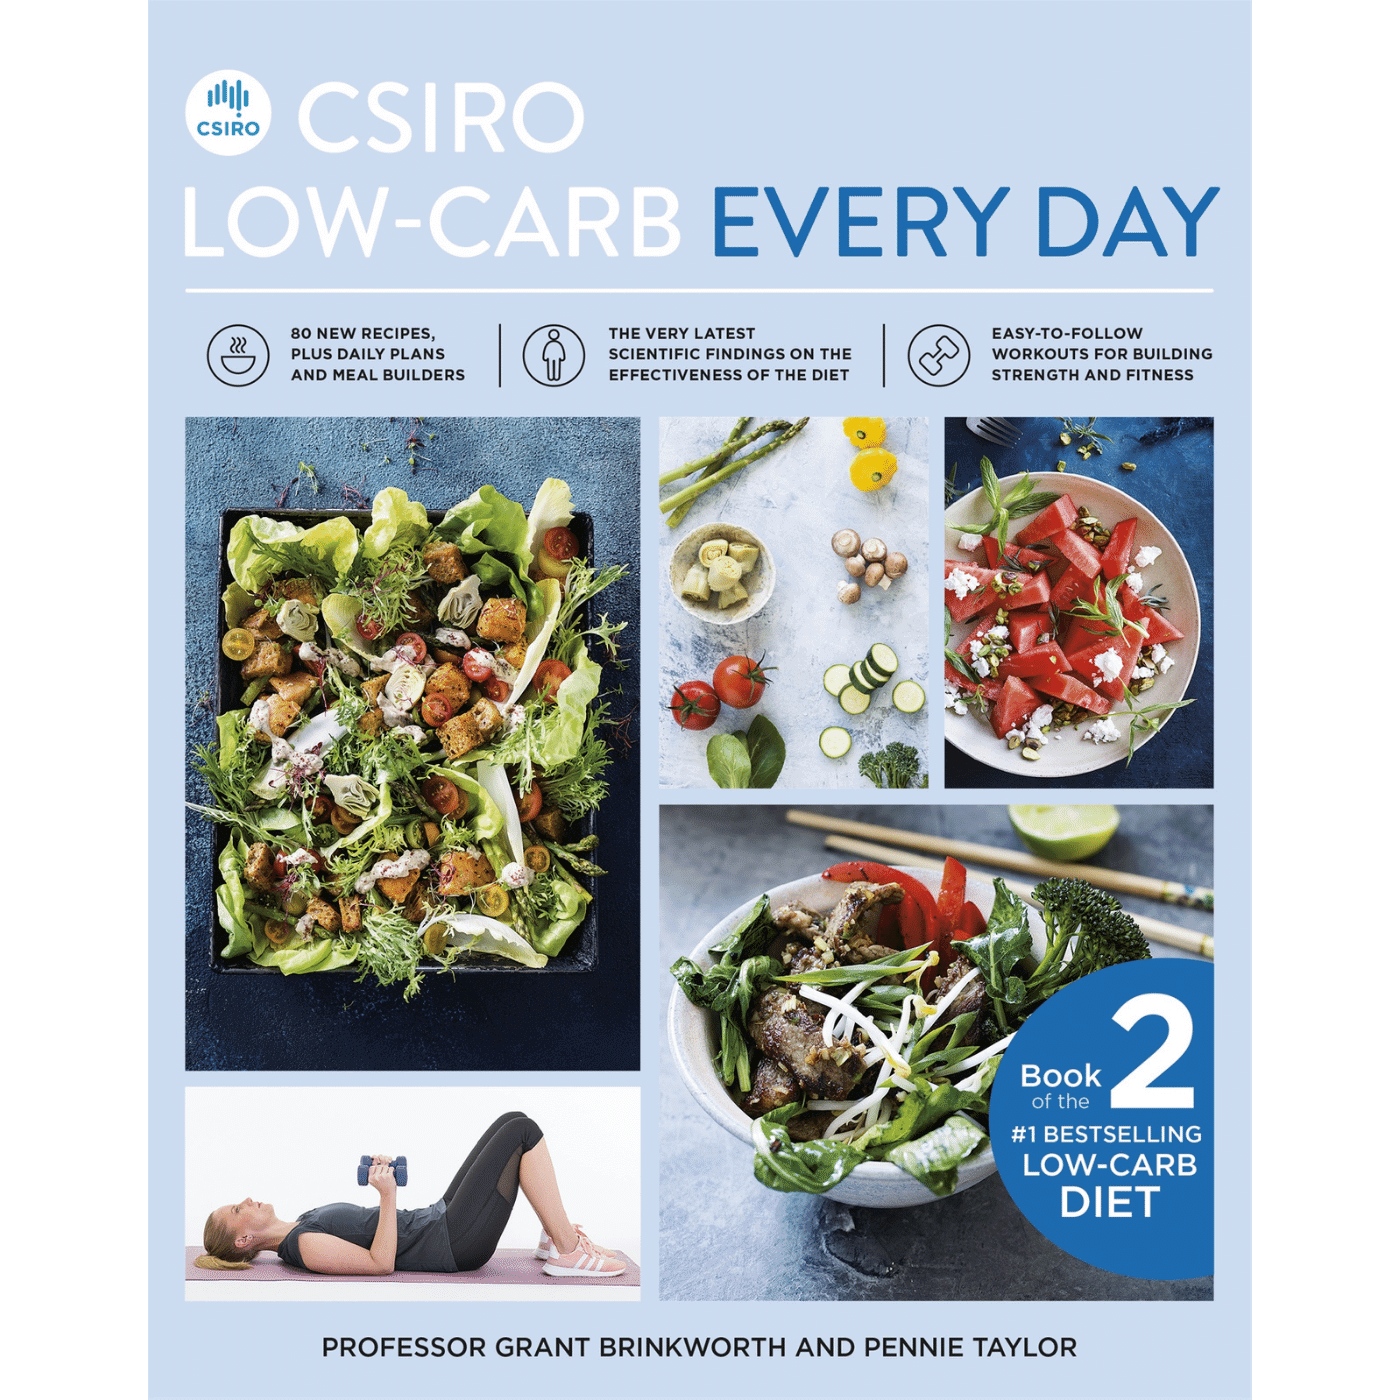 CSIRO Low-carb every day book cover.